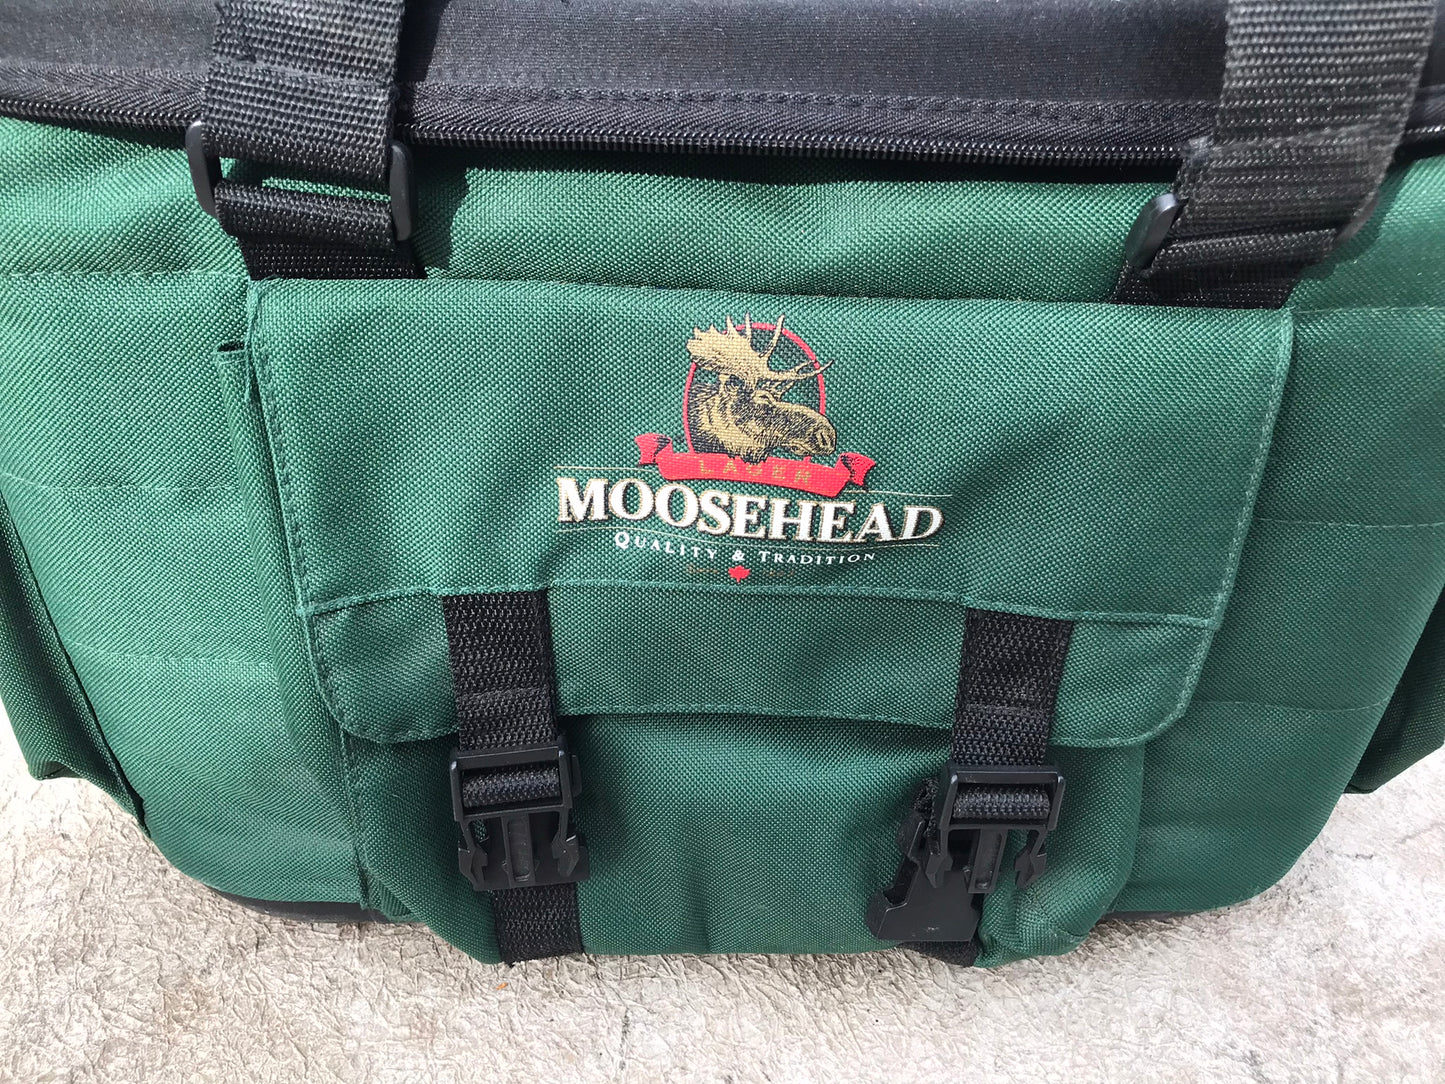 Moosehead Beer Lager Vintage Hunting Fishing Camping Cooler Loaded With Pockets Minor Tear on Inside Lid 16 x 12 x 10 inch Holds 12 Beer and Gear